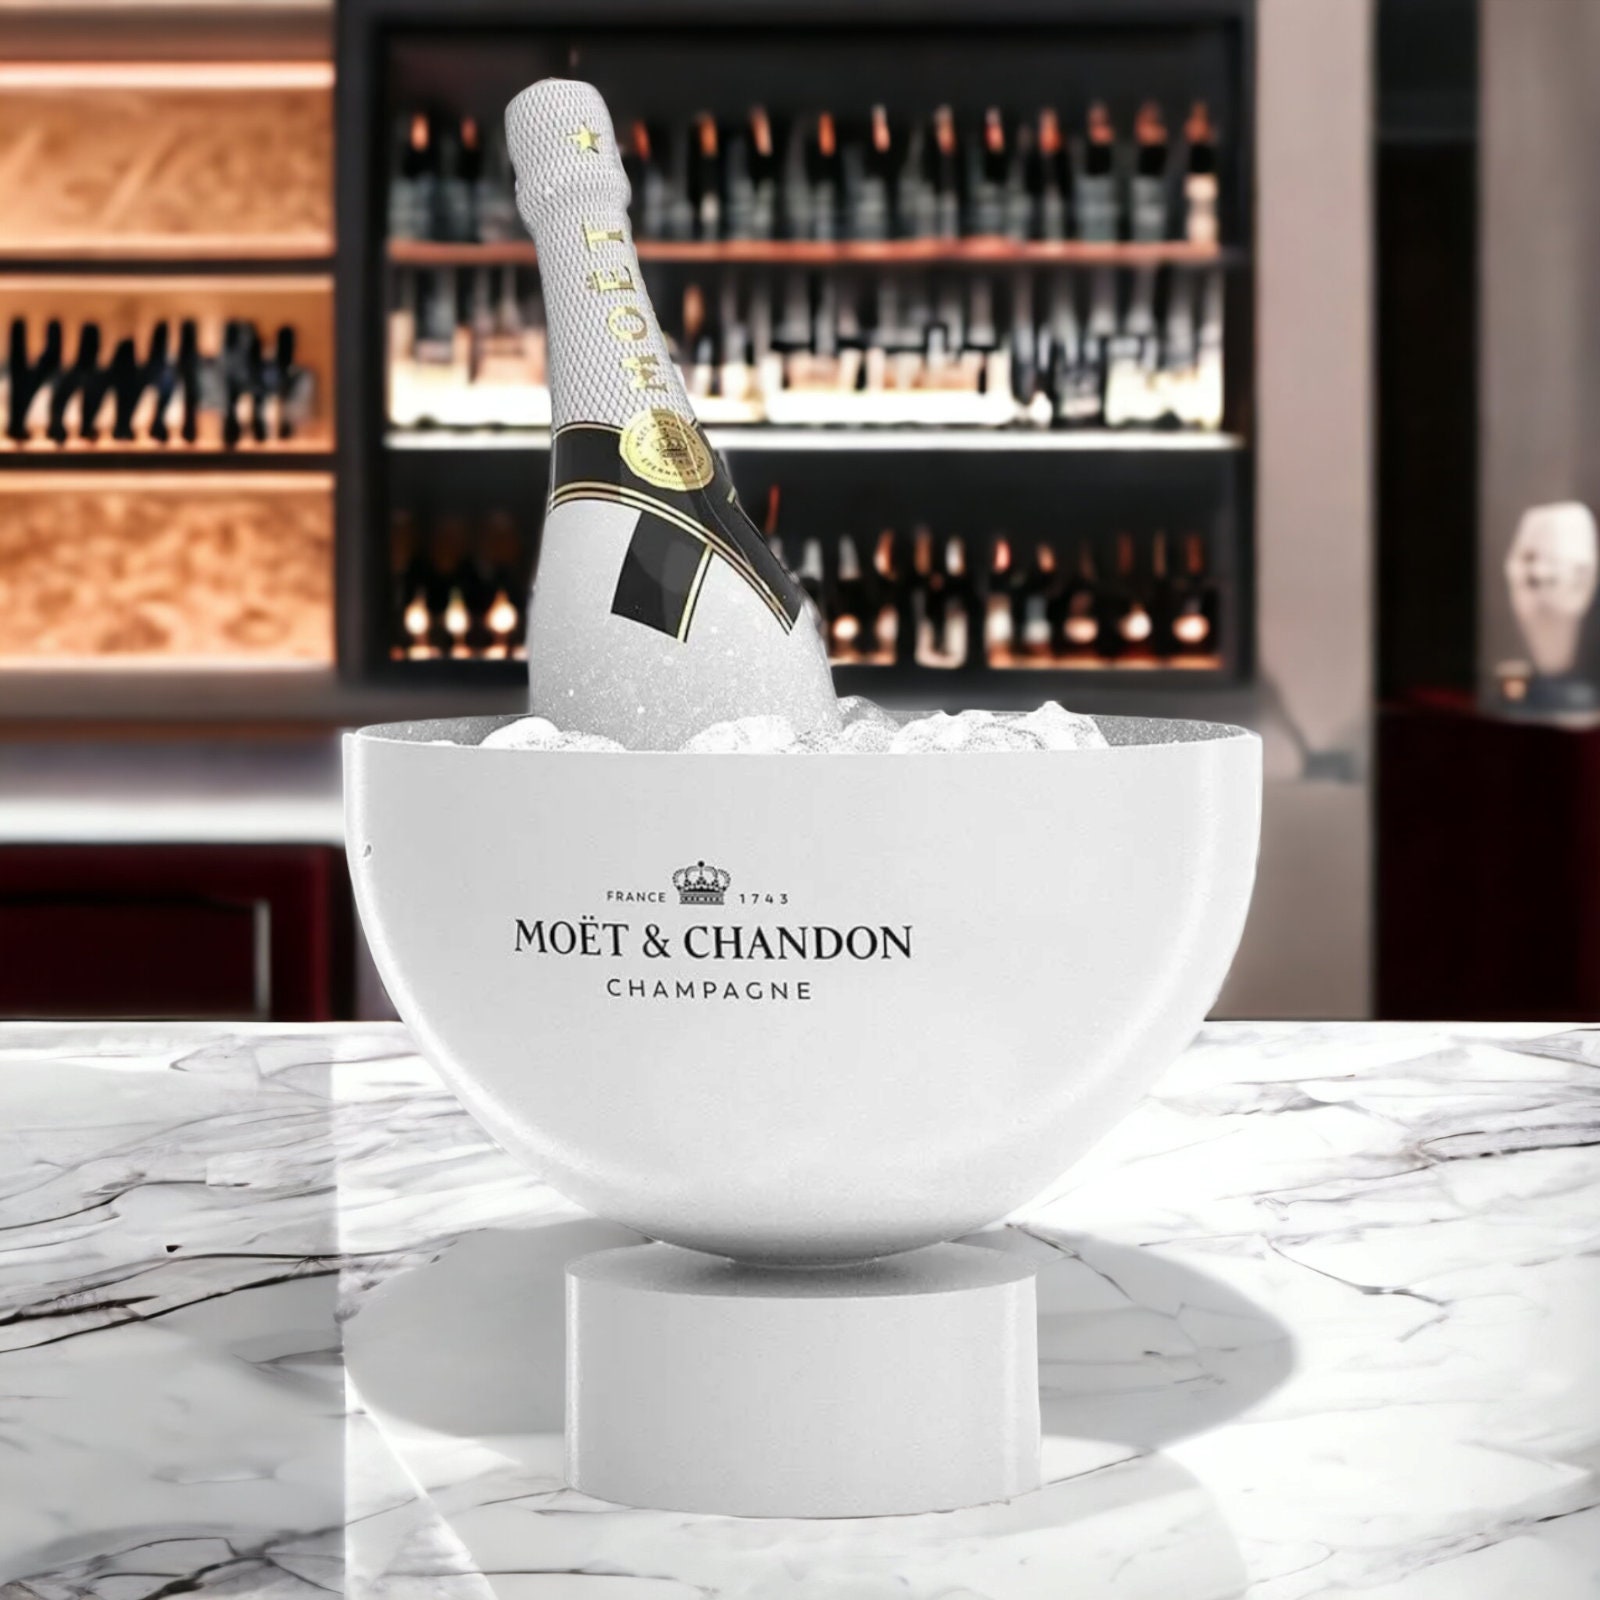 Moet and Chandon ice imperial - Dummy display bottle 016